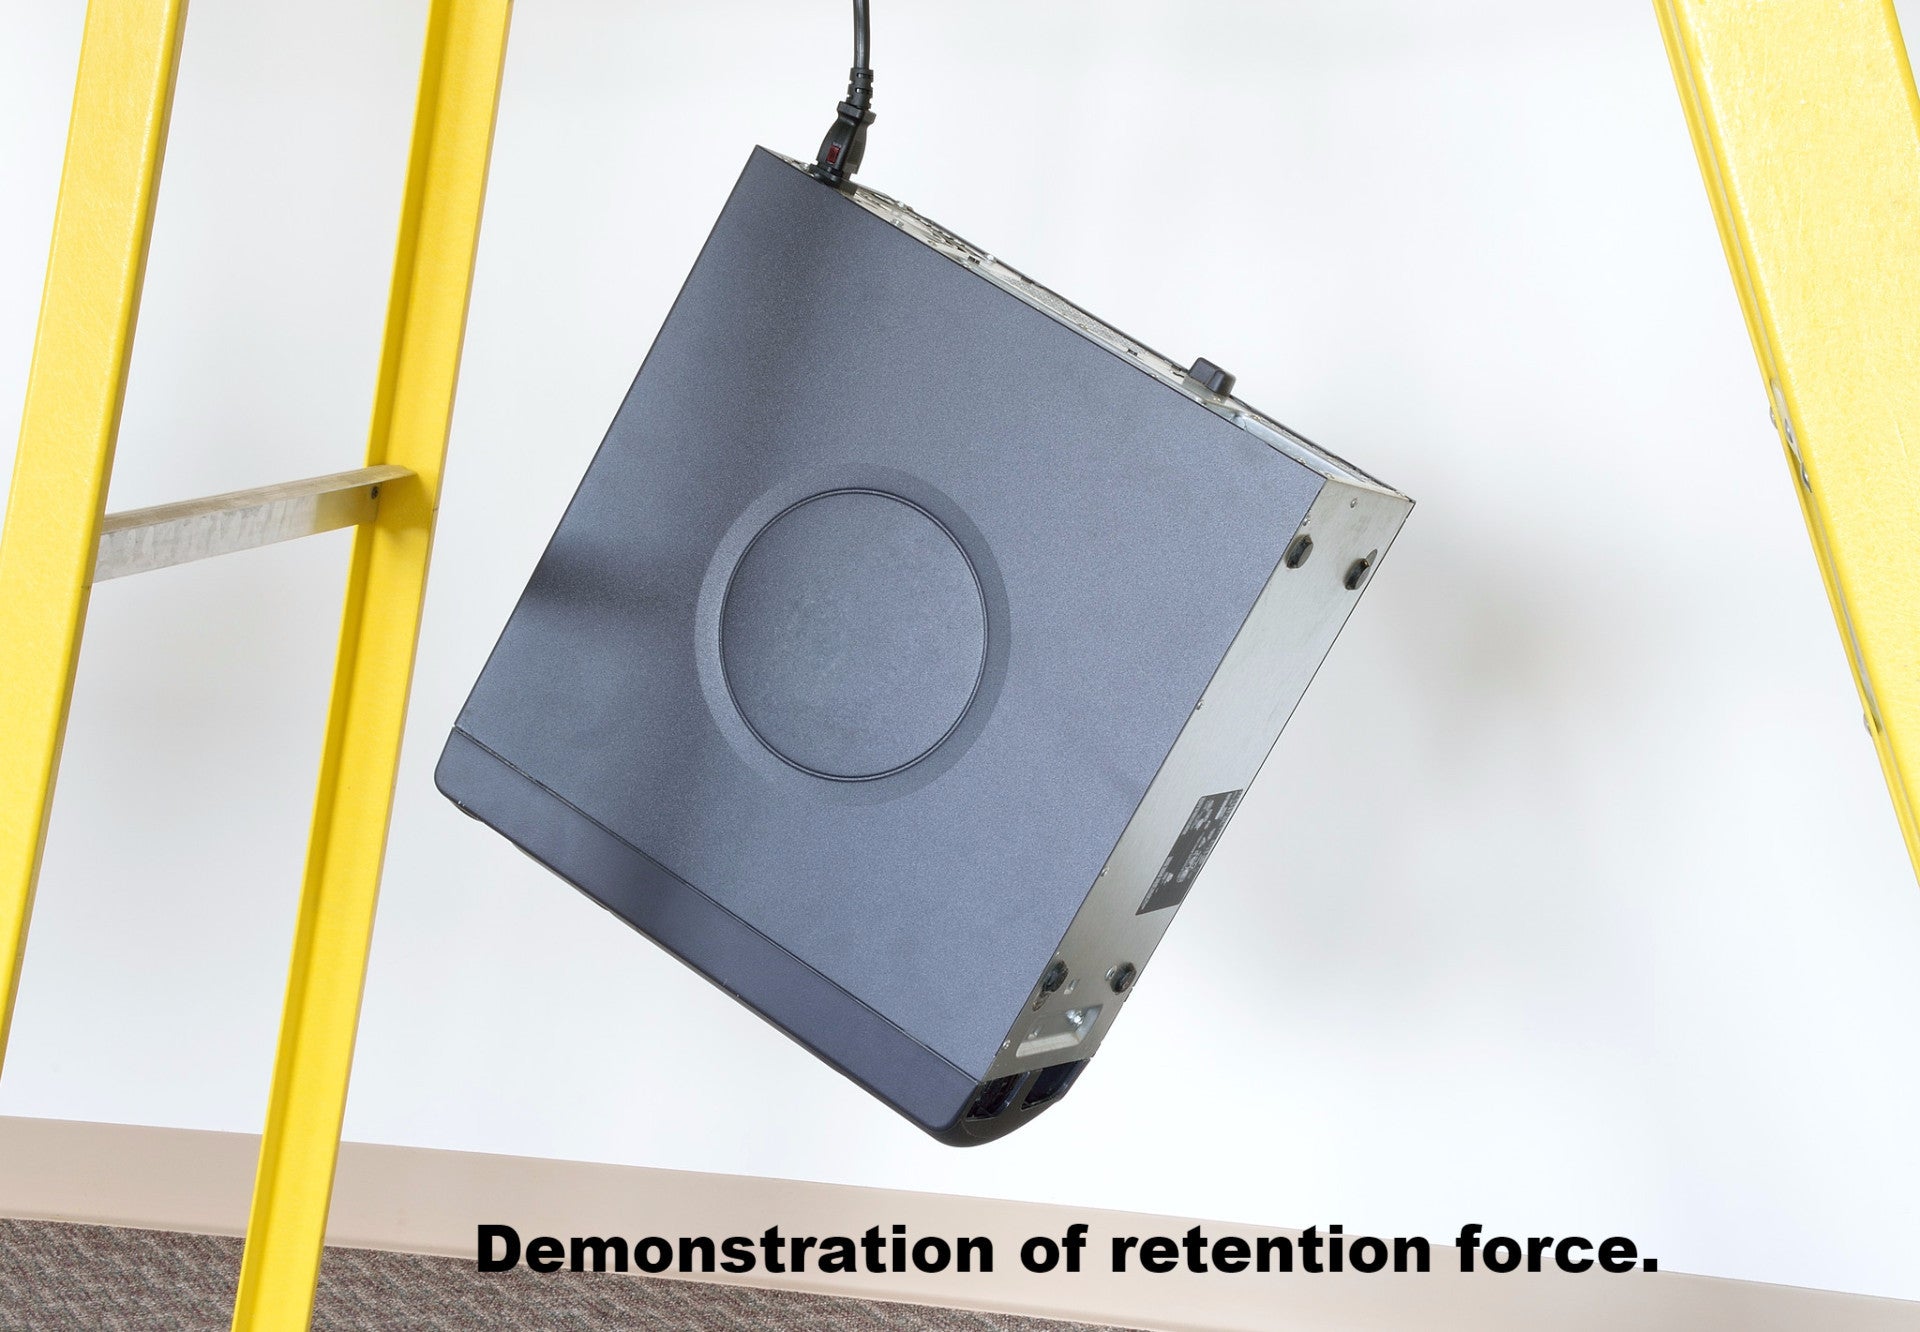 Demonstration of retention force - Desktop computer hanging from cord